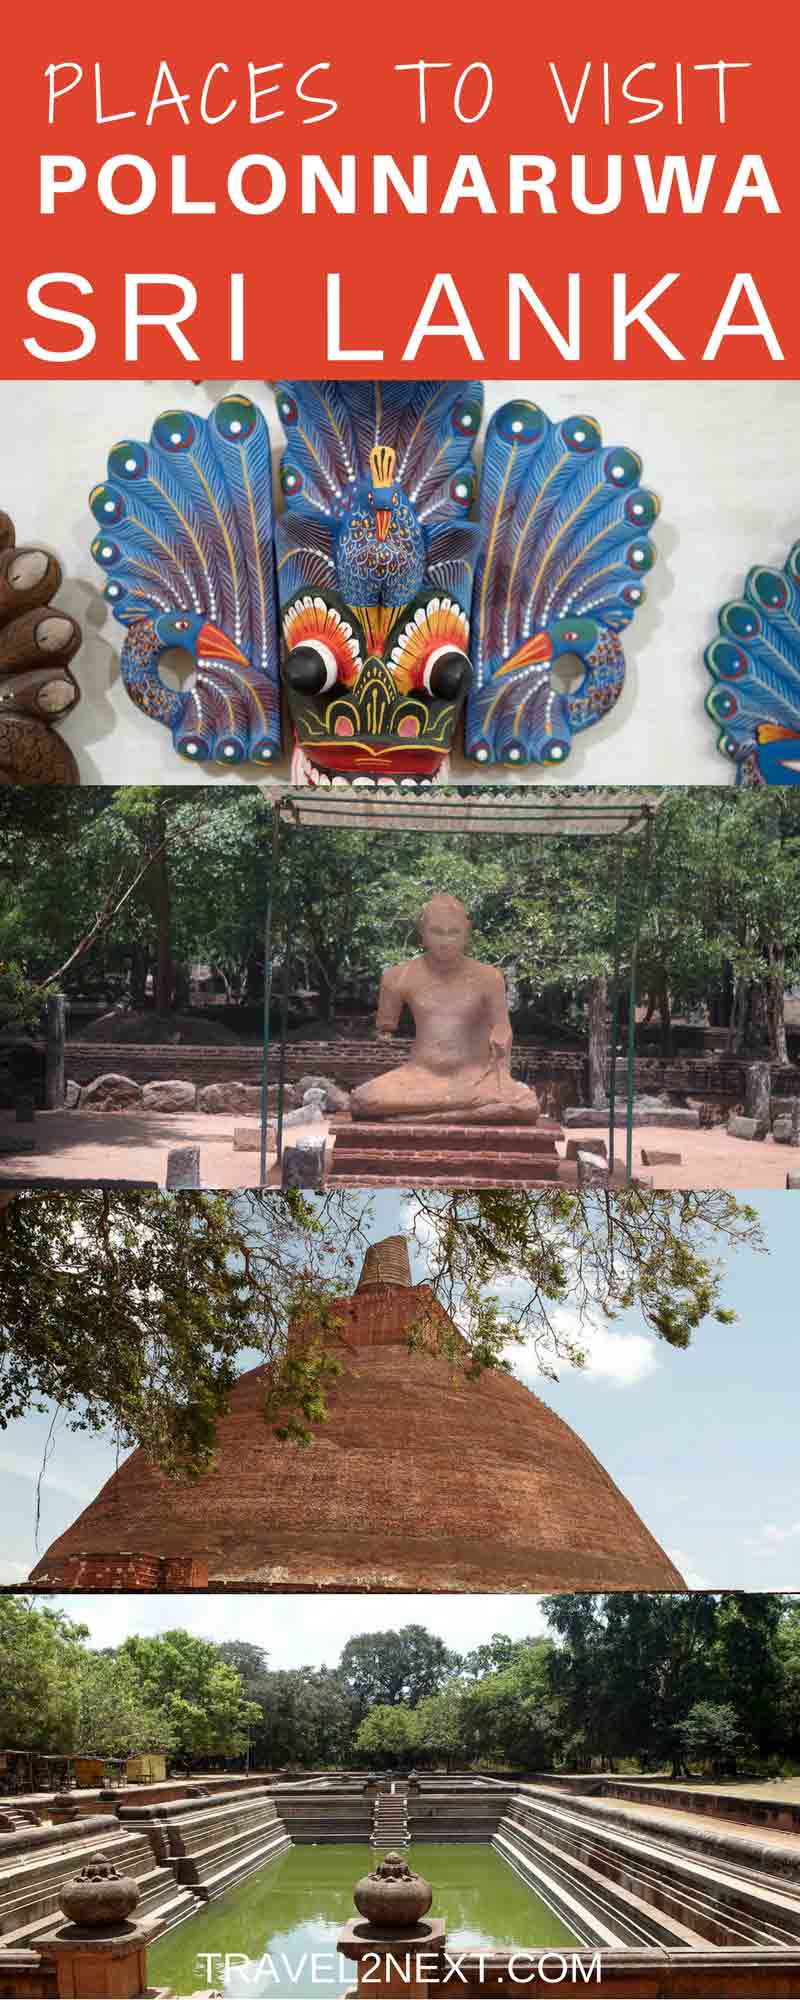 Places to visit in Polonnaruwa